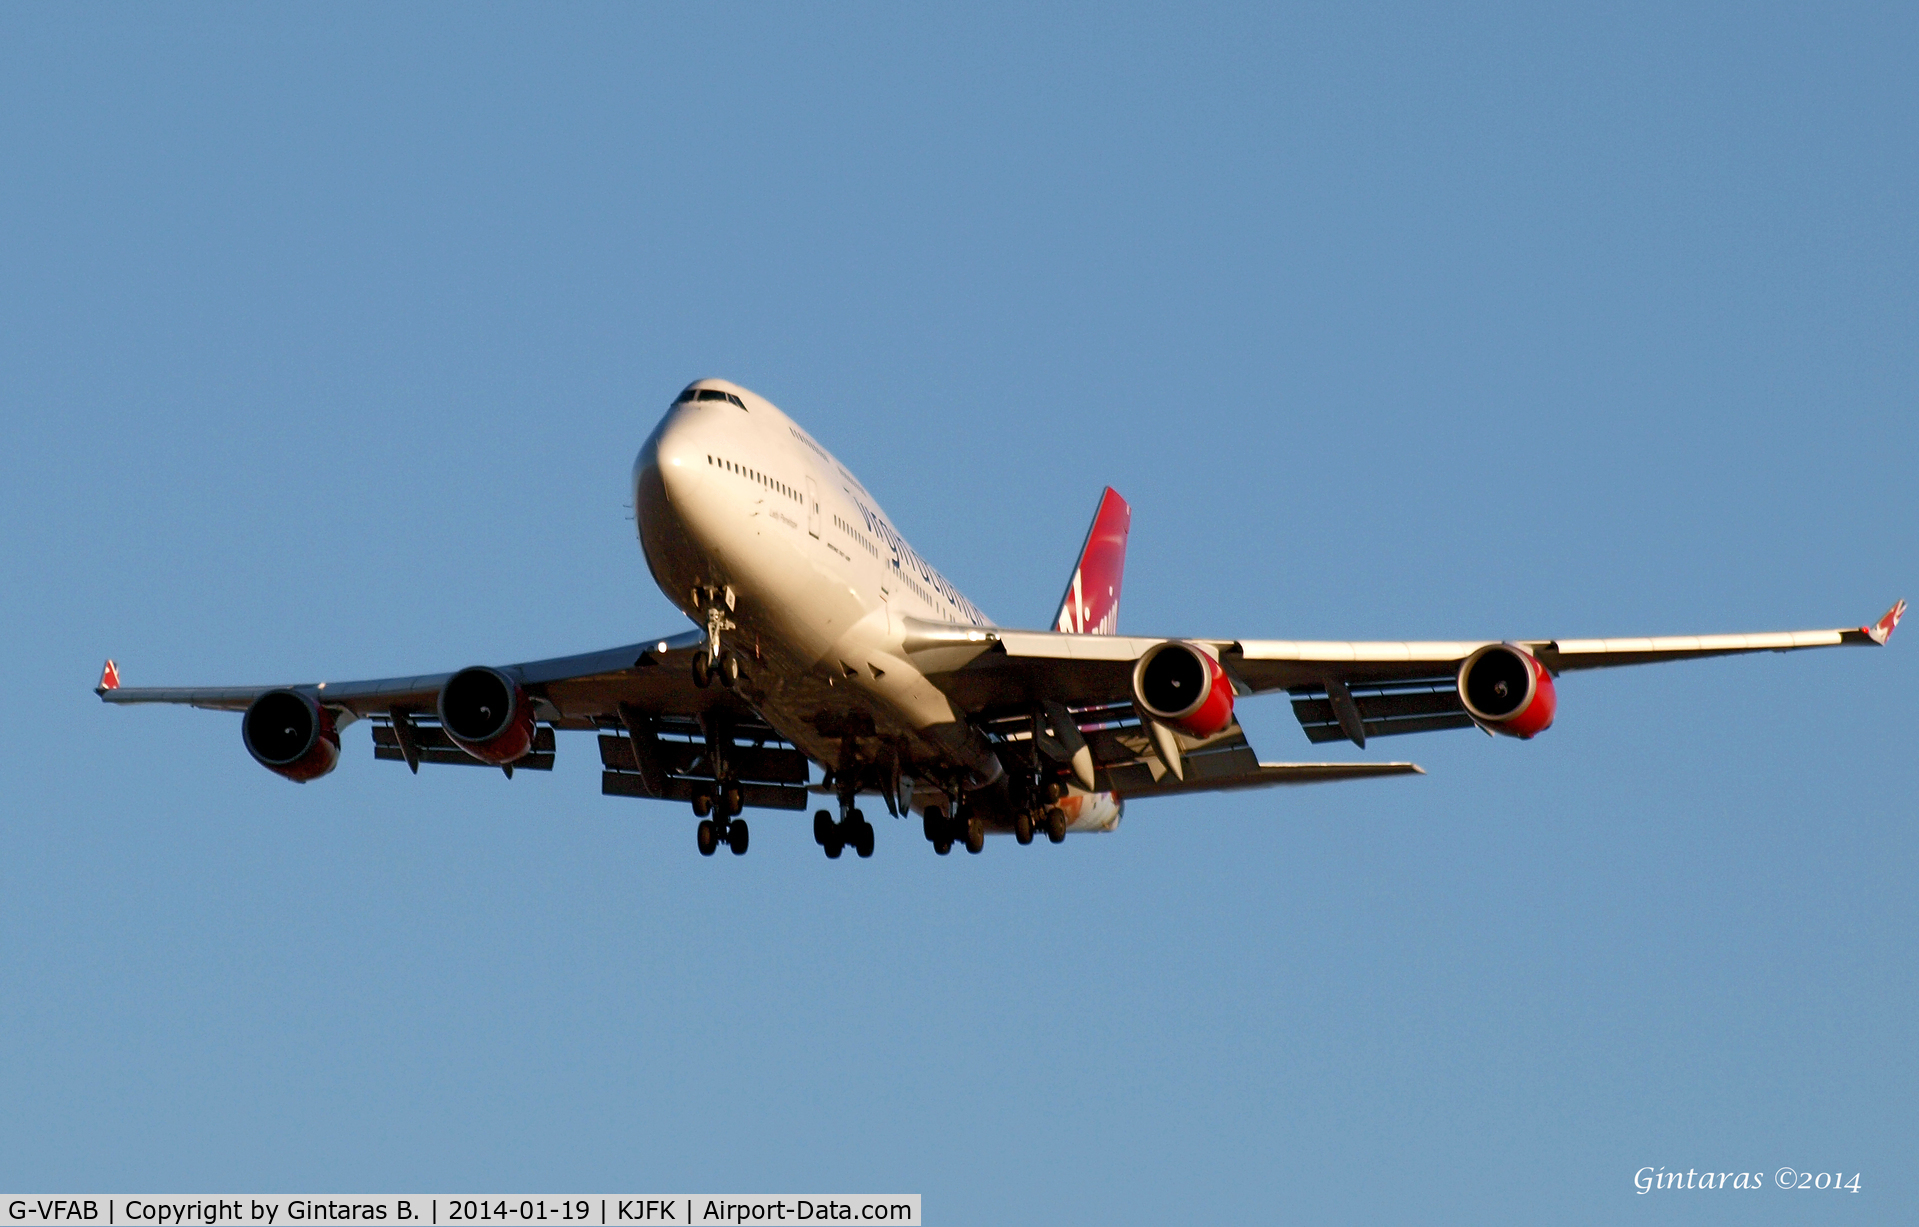 G-VFAB, 1994 Boeing 747-4Q8 C/N 24958, Going to a landing on RWY 31R